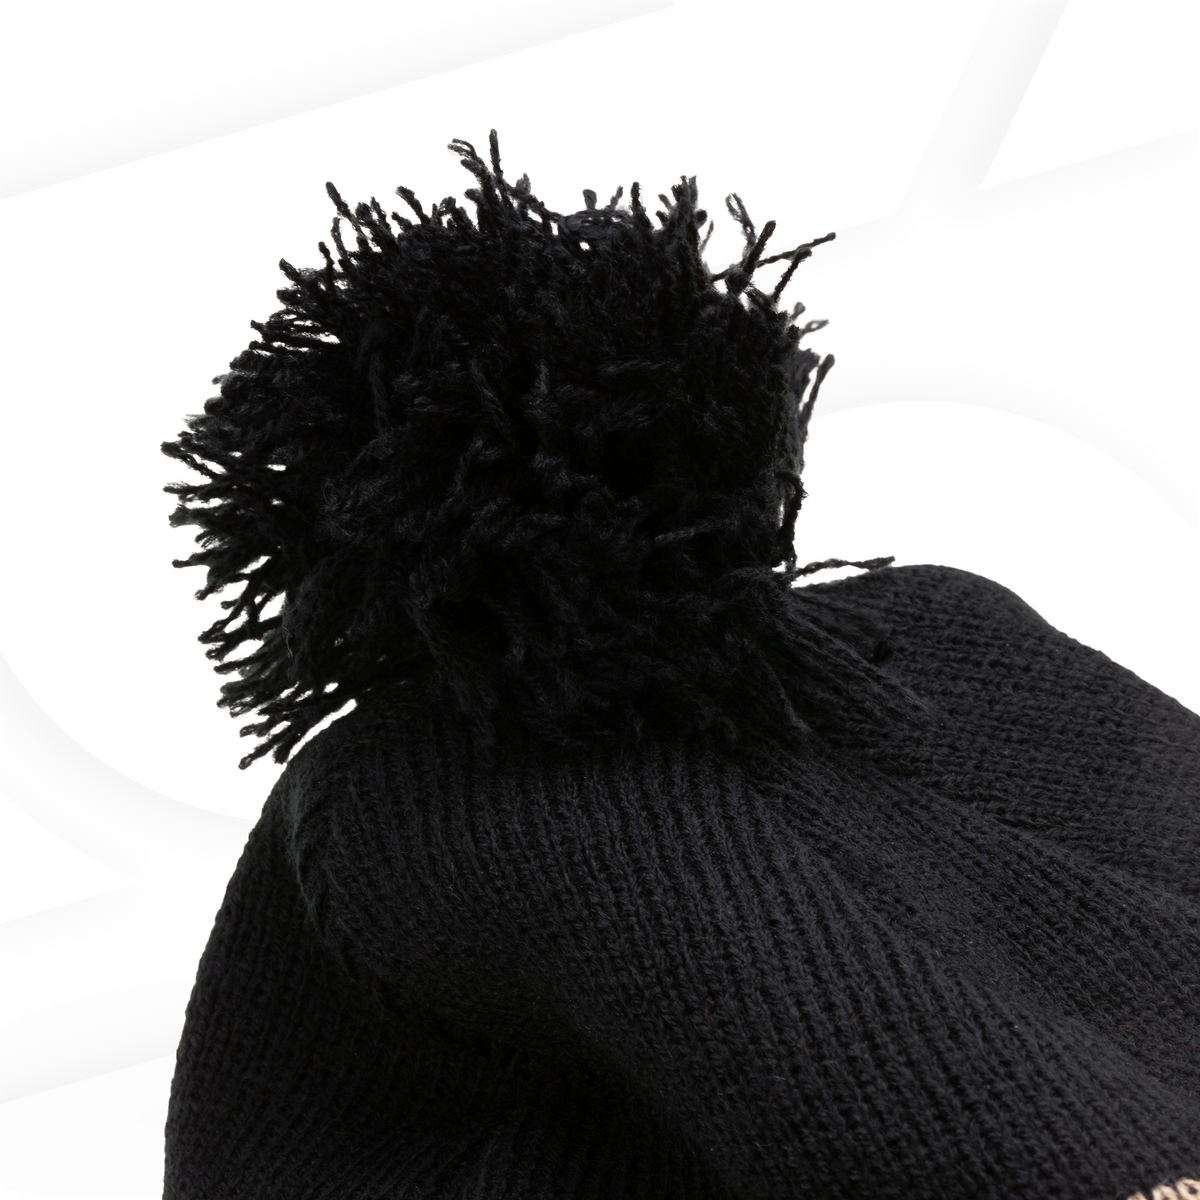 RAW Knit Beanie Hat | Black and Brown Clothing Accessories RAWU-APRP-0004 esd-official